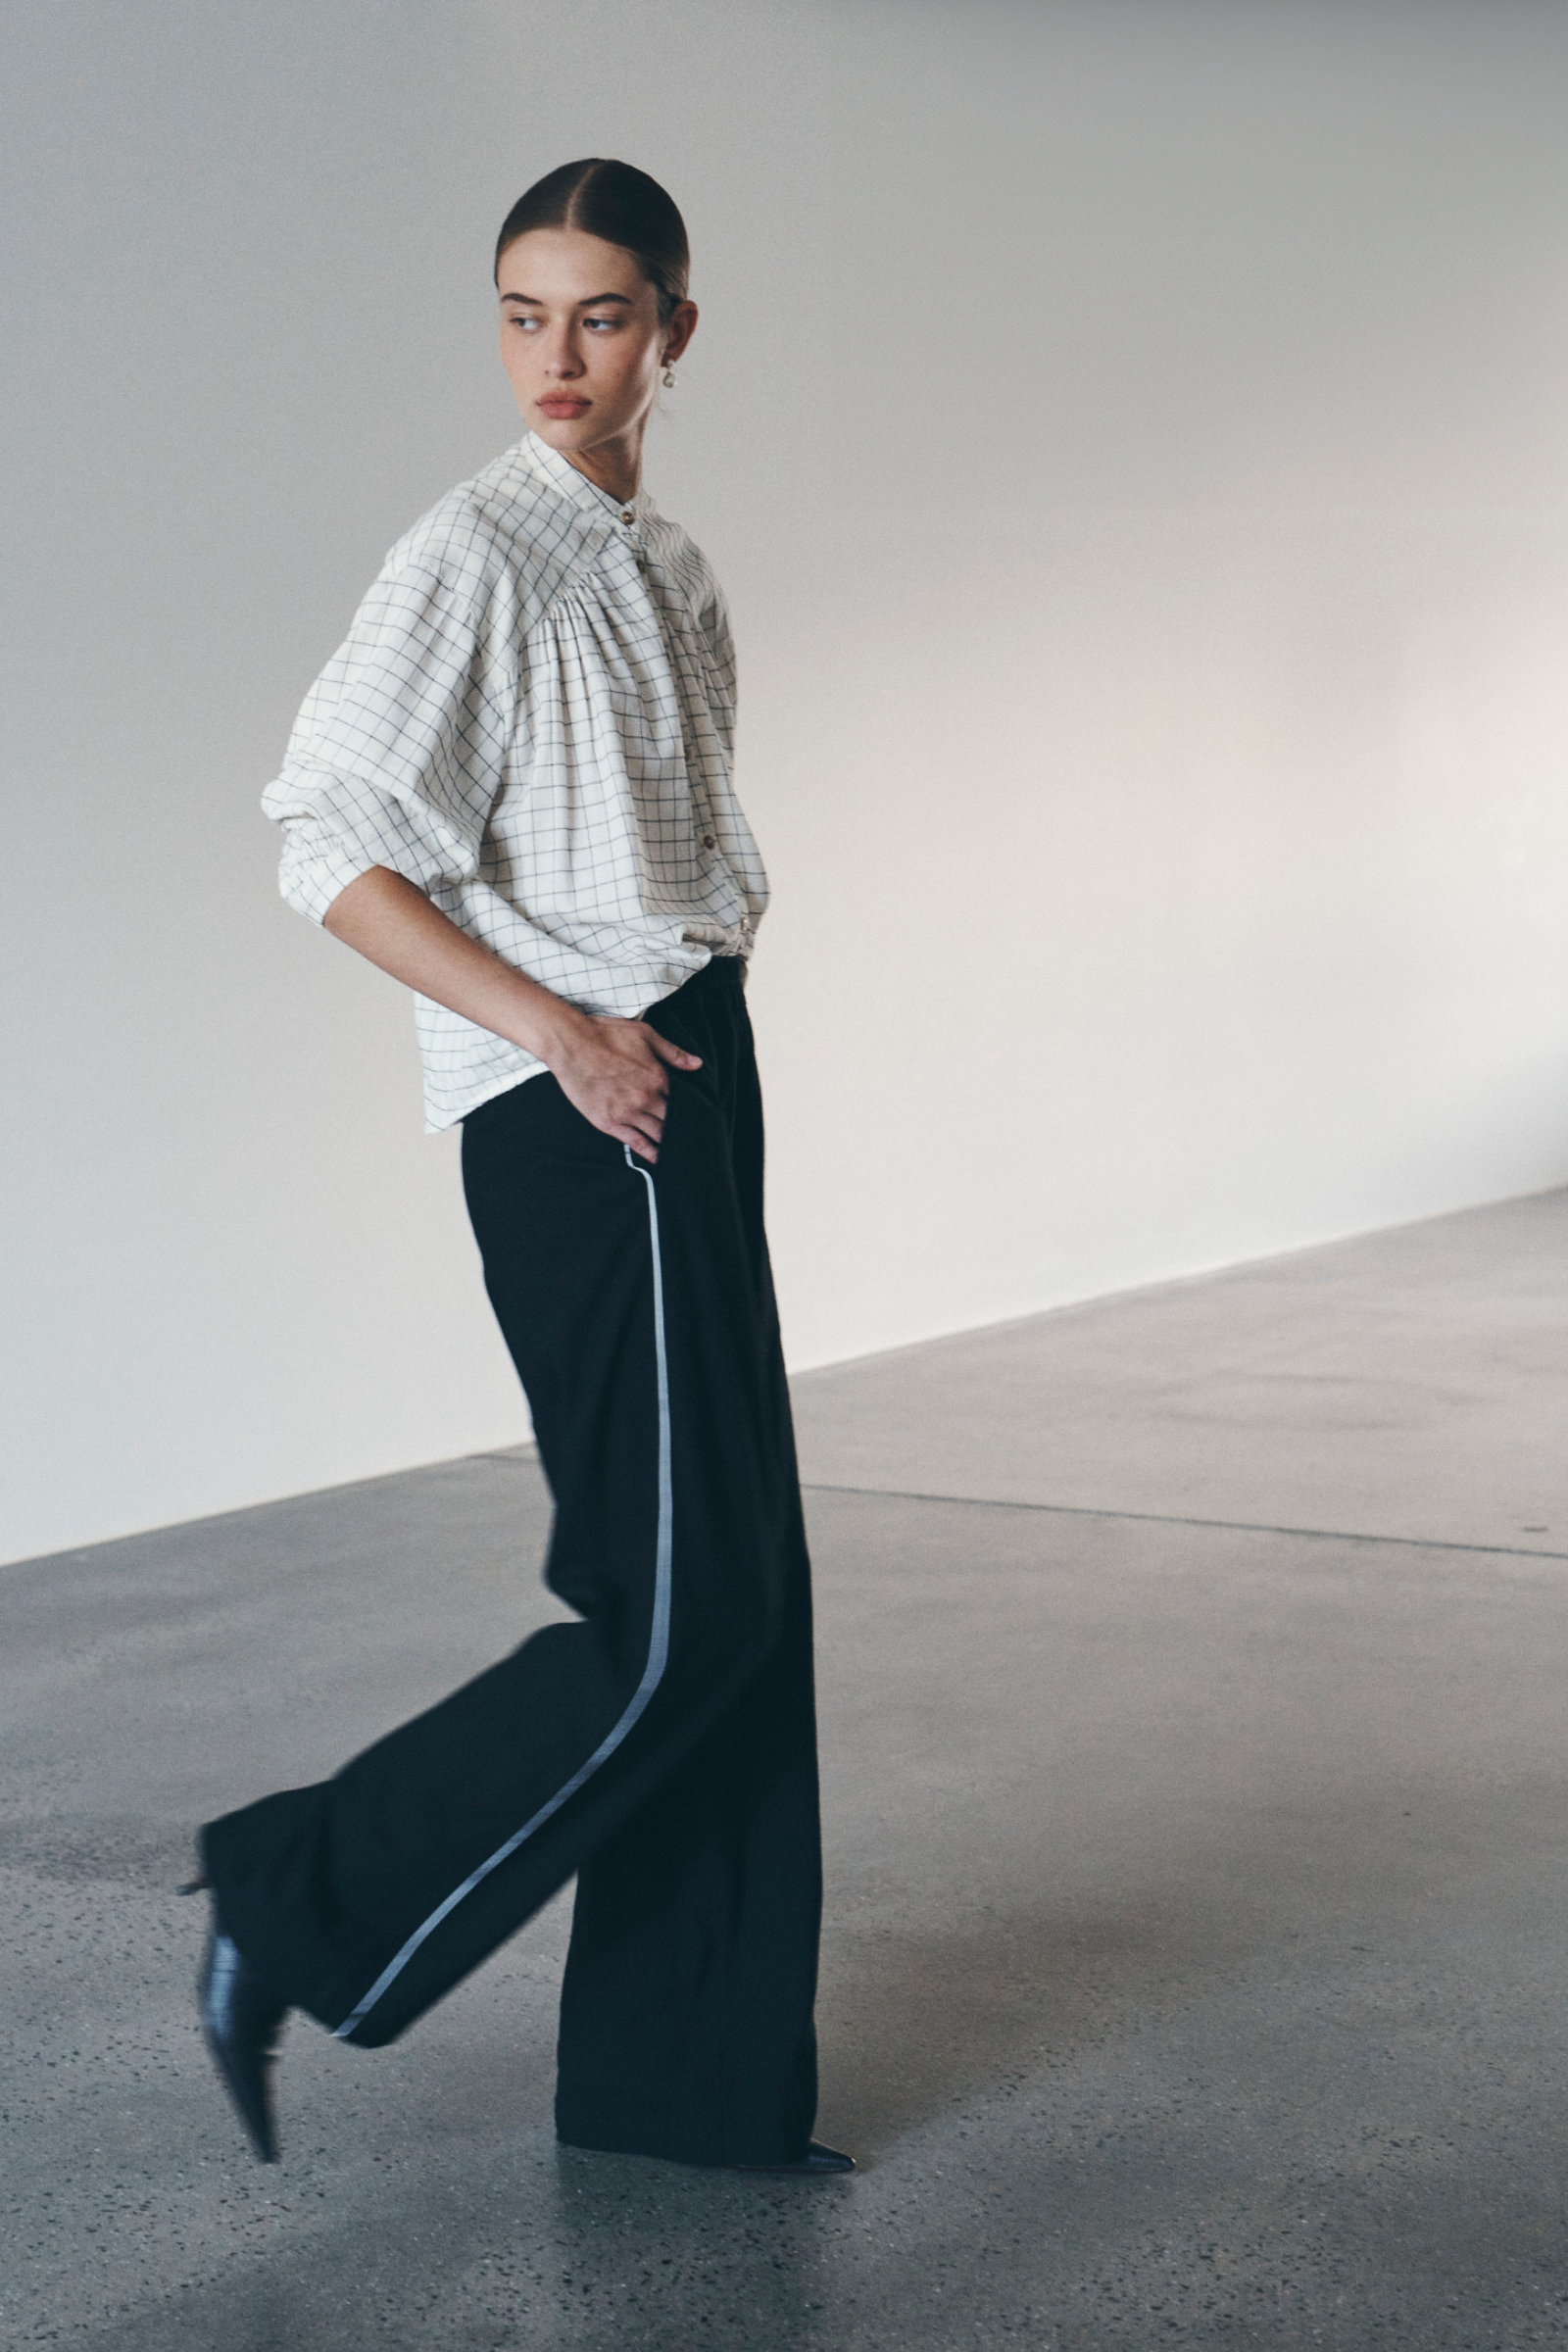 Bianca wears the Cora Blouse in Black & White Check and Vera Linen Wide Pants. She accessorises with pearl drop earrings, black leather boots, and completes the look with a low, slick bun. 